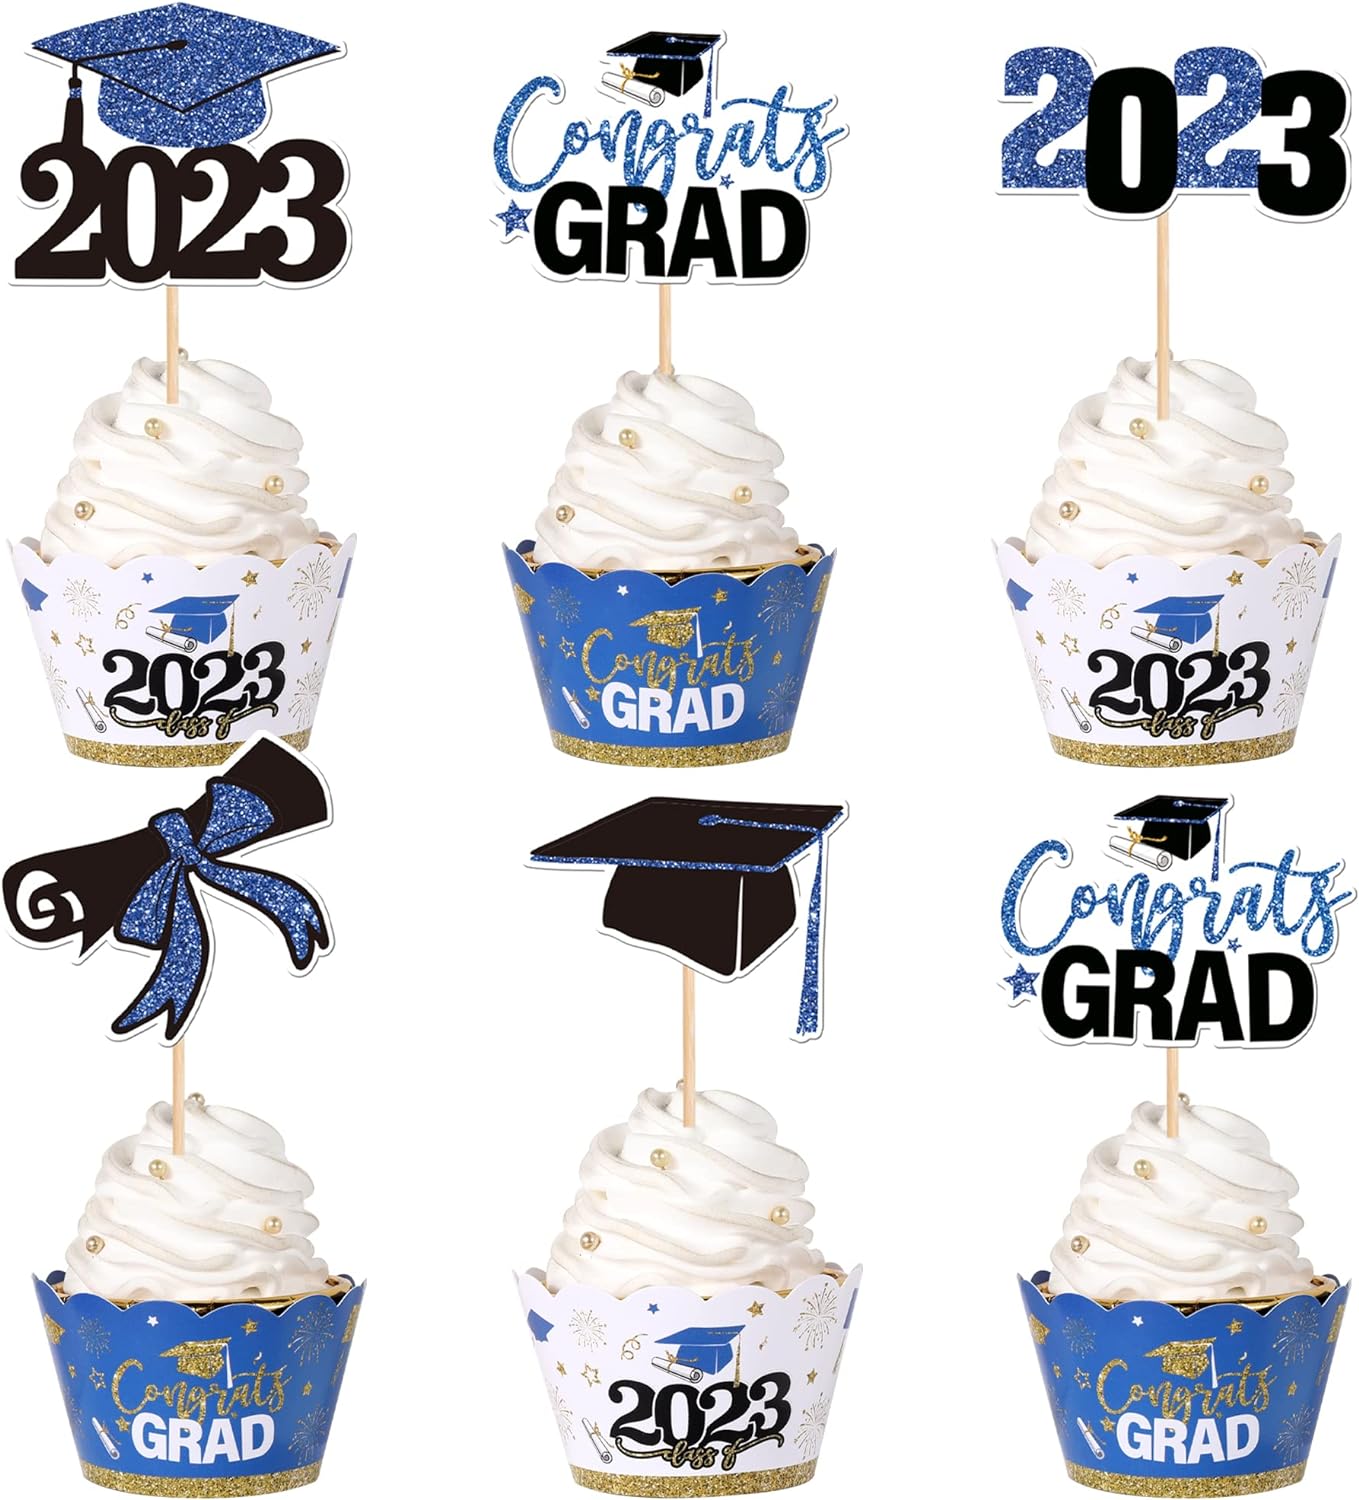 40 PCS 2023 Graduation Cupcake Toppers and Wrappers Double Sided Diploma Class of 2023 Congrats Grad Cap Cupcake Picks for 2023 Graduation Theme Party Cake Decorations Supplies Blue